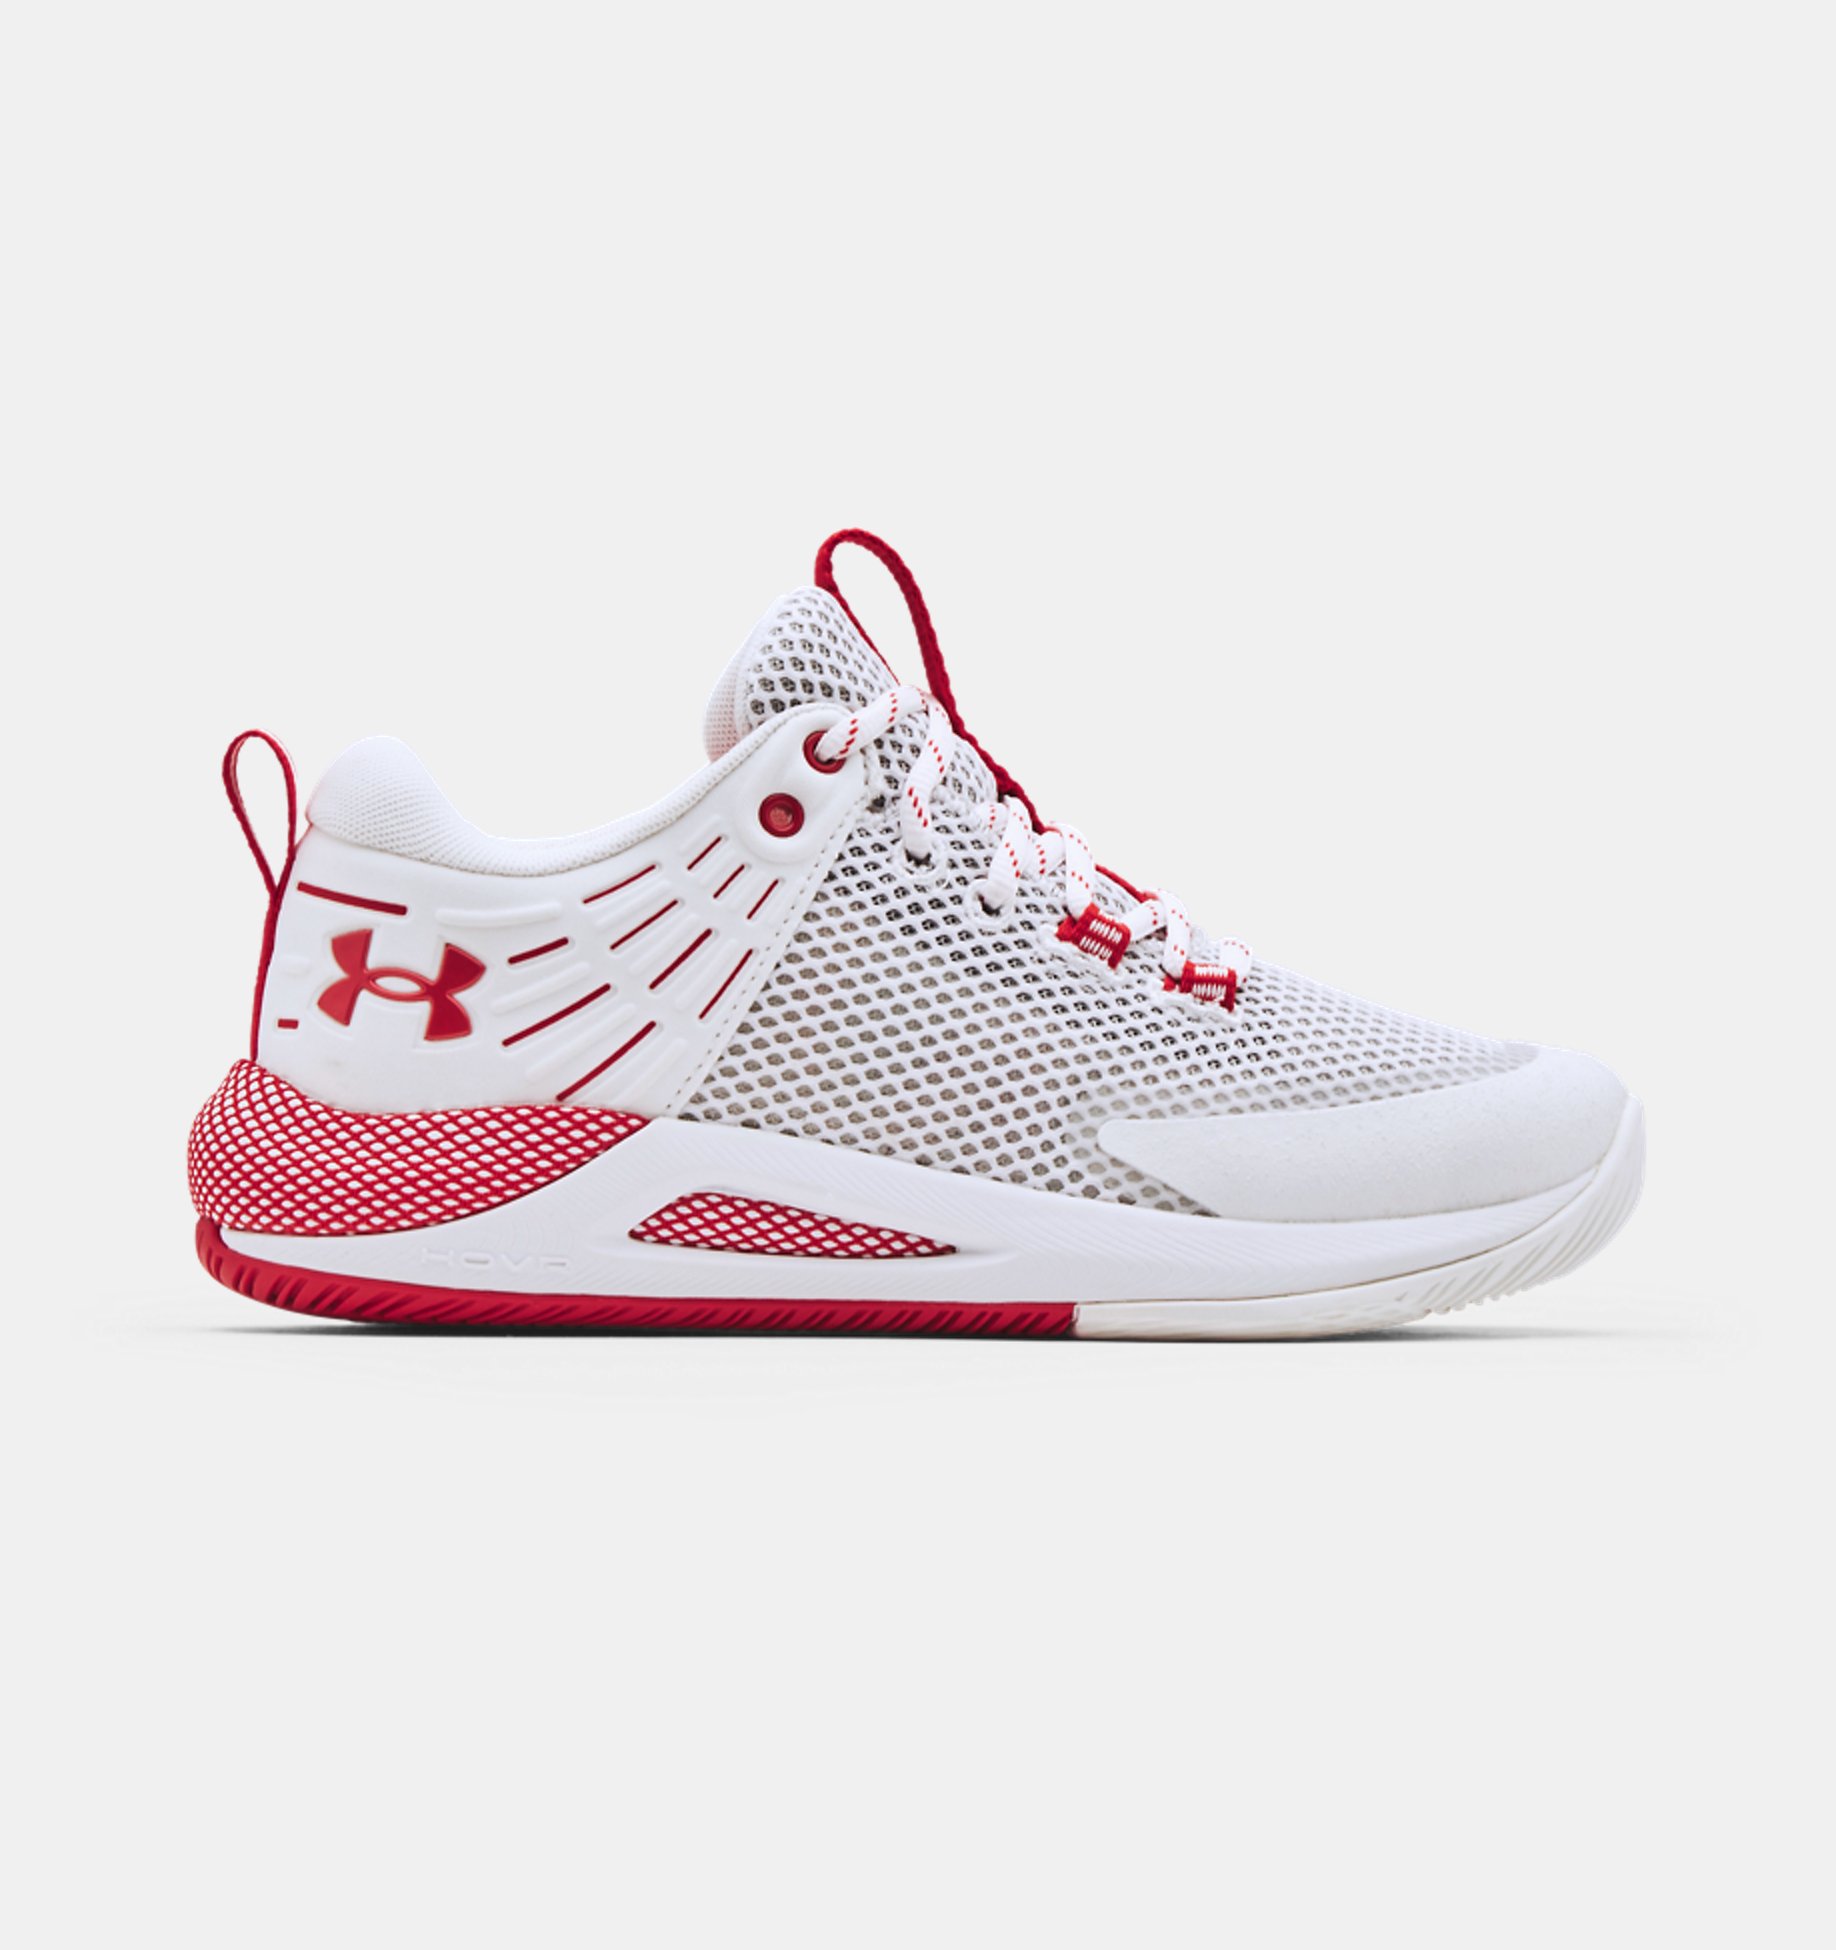 Underarmour Womens UA HOVR Block City Volleyball Shoes